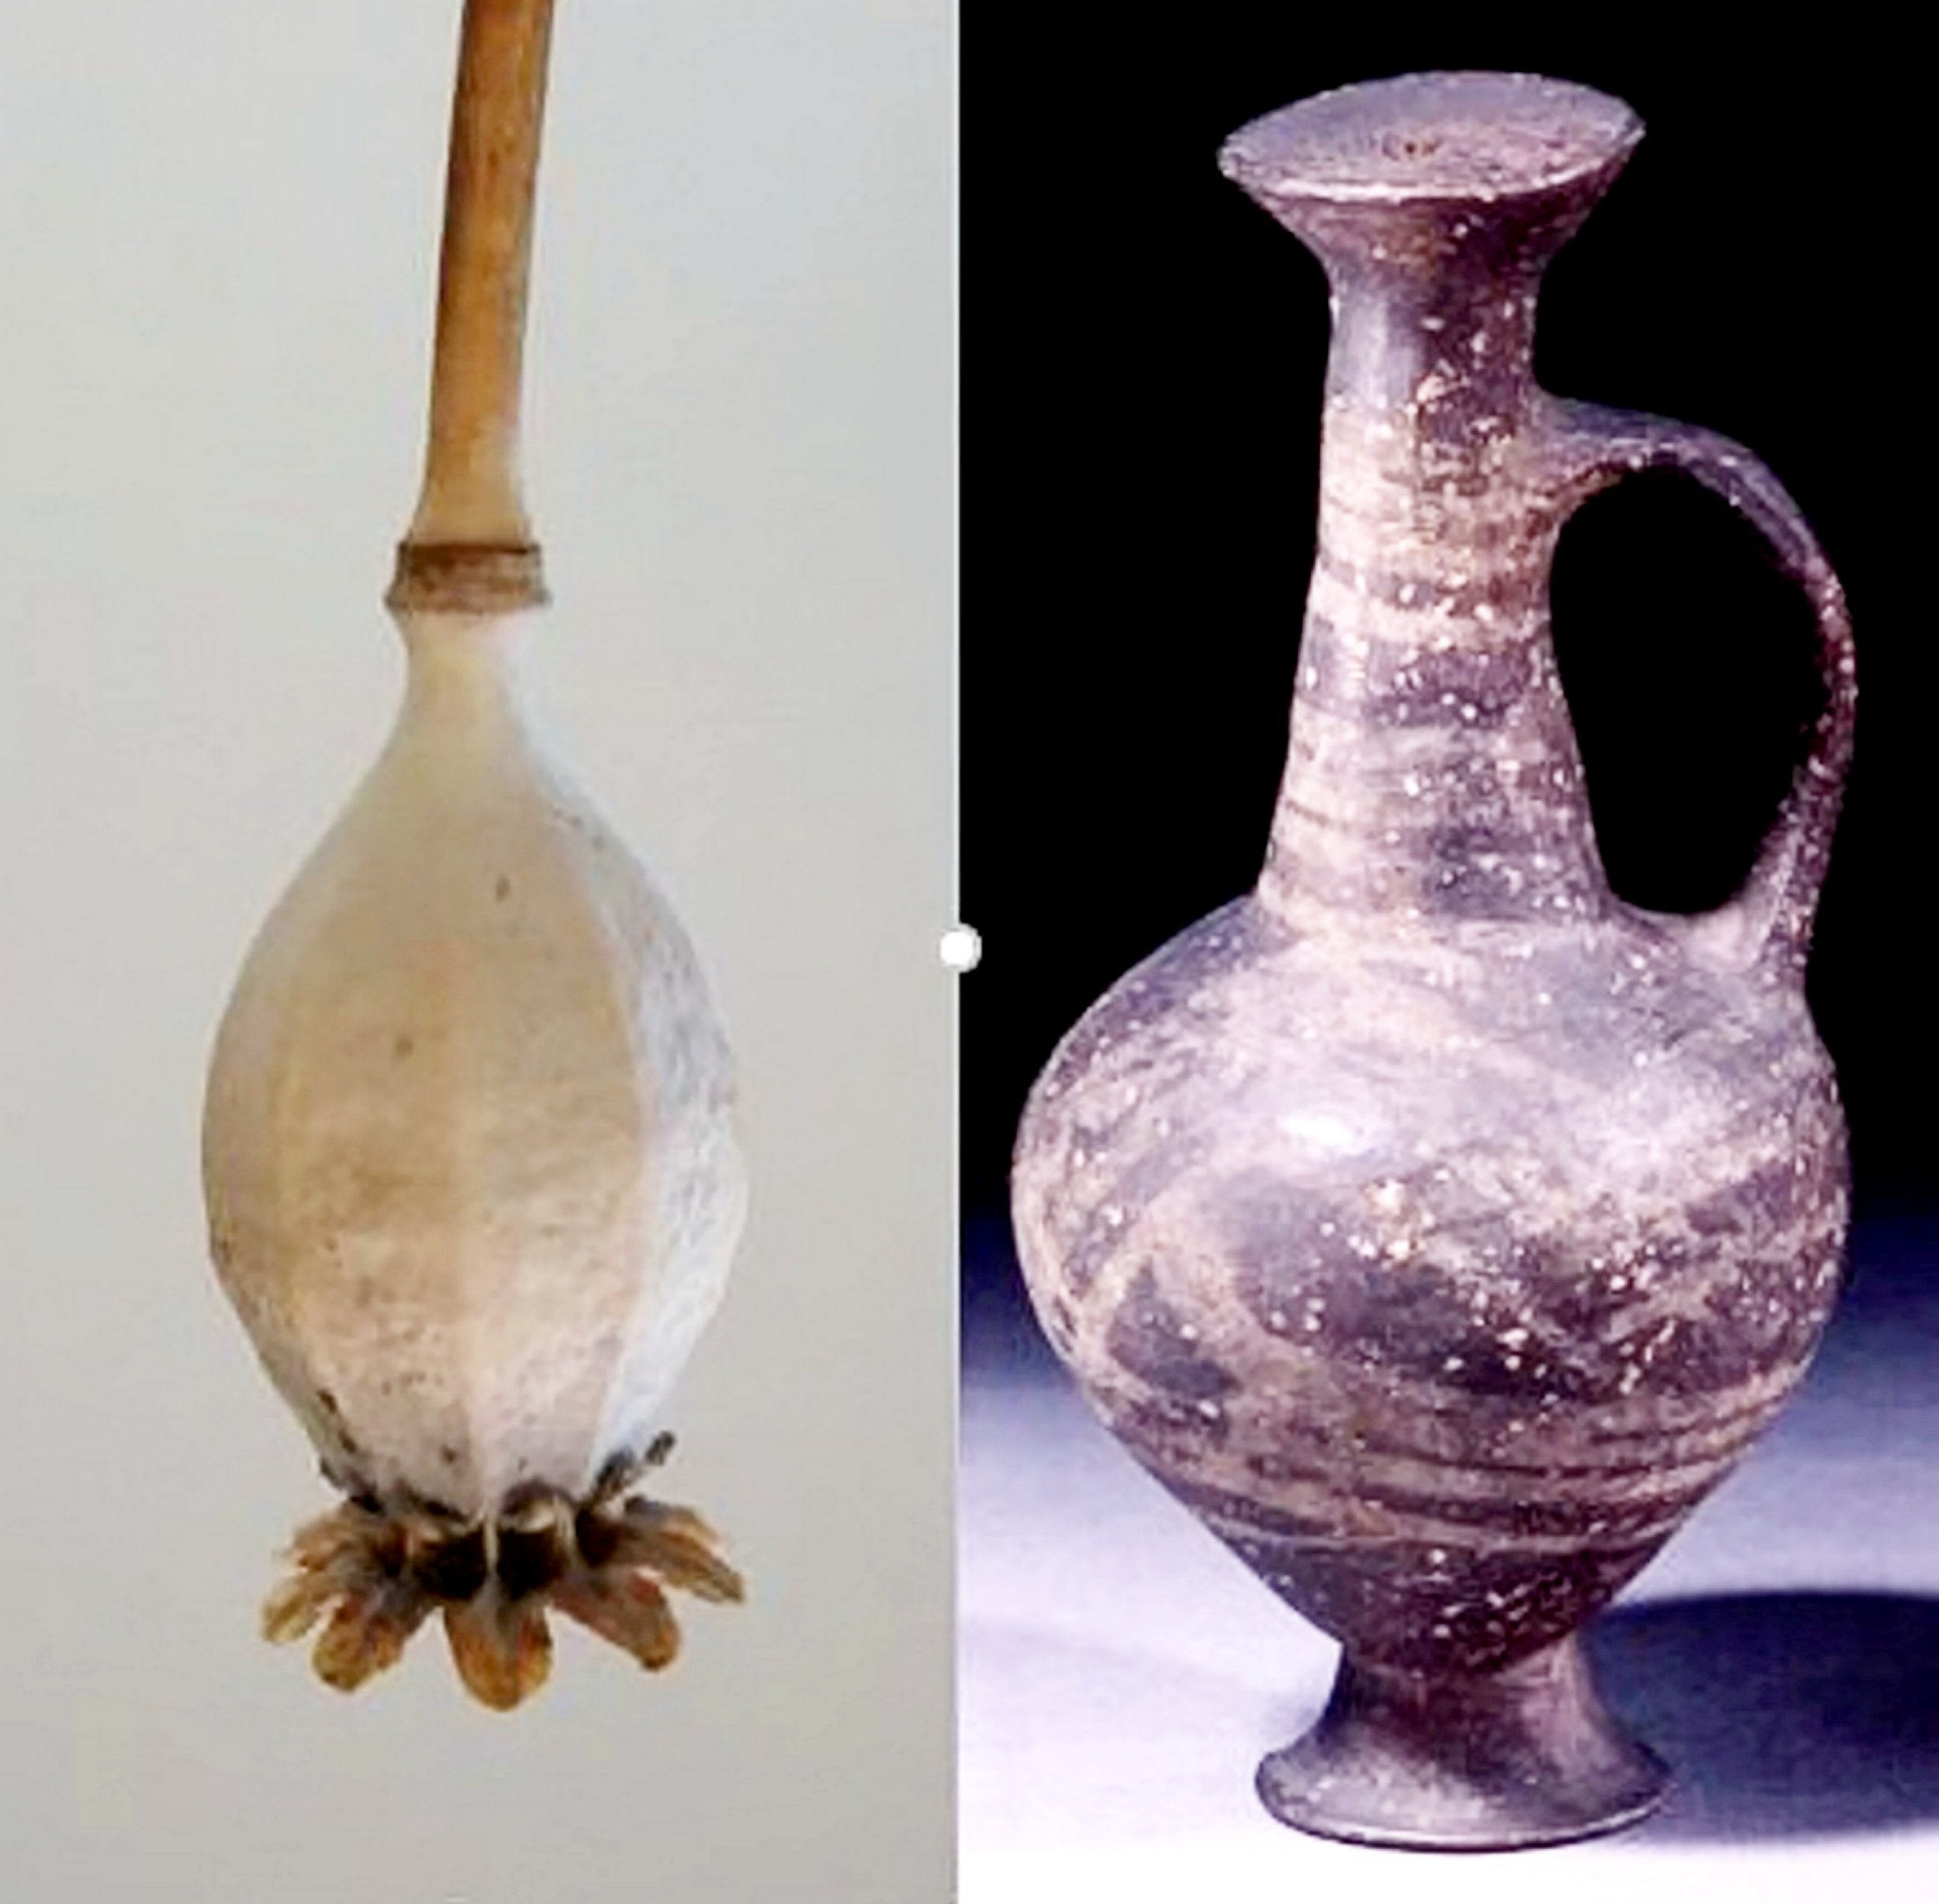 The base-ring juglet resembles the seed head of an opium poppy